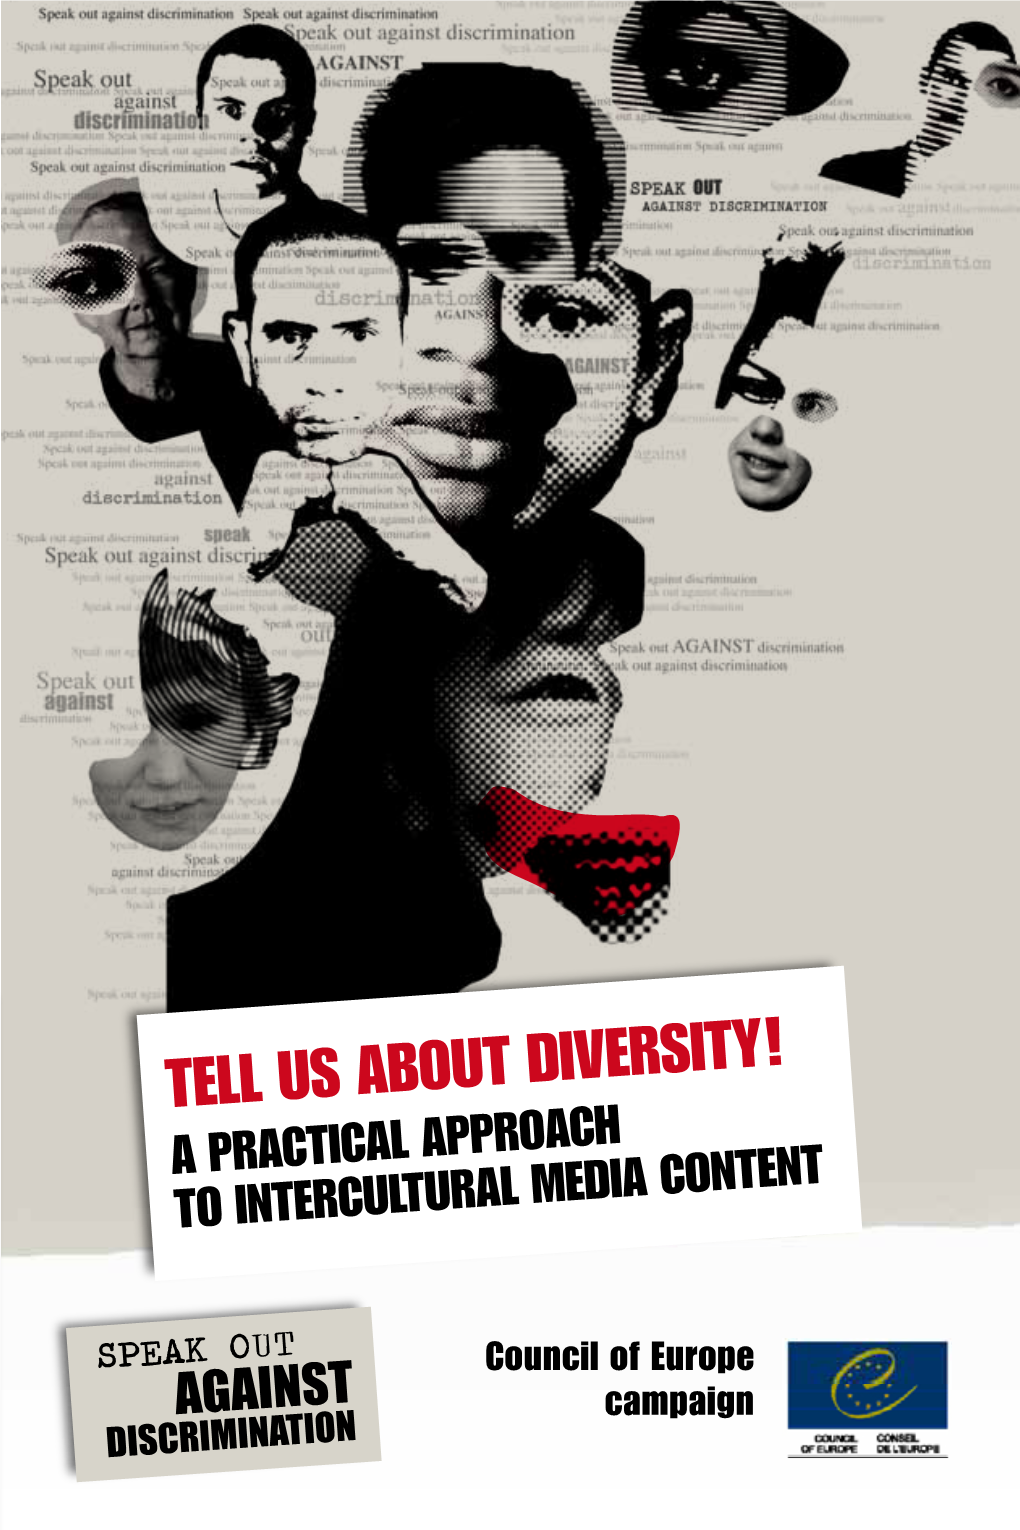 Tell Us About Diversity! a Practical Approach to Intercultural Media